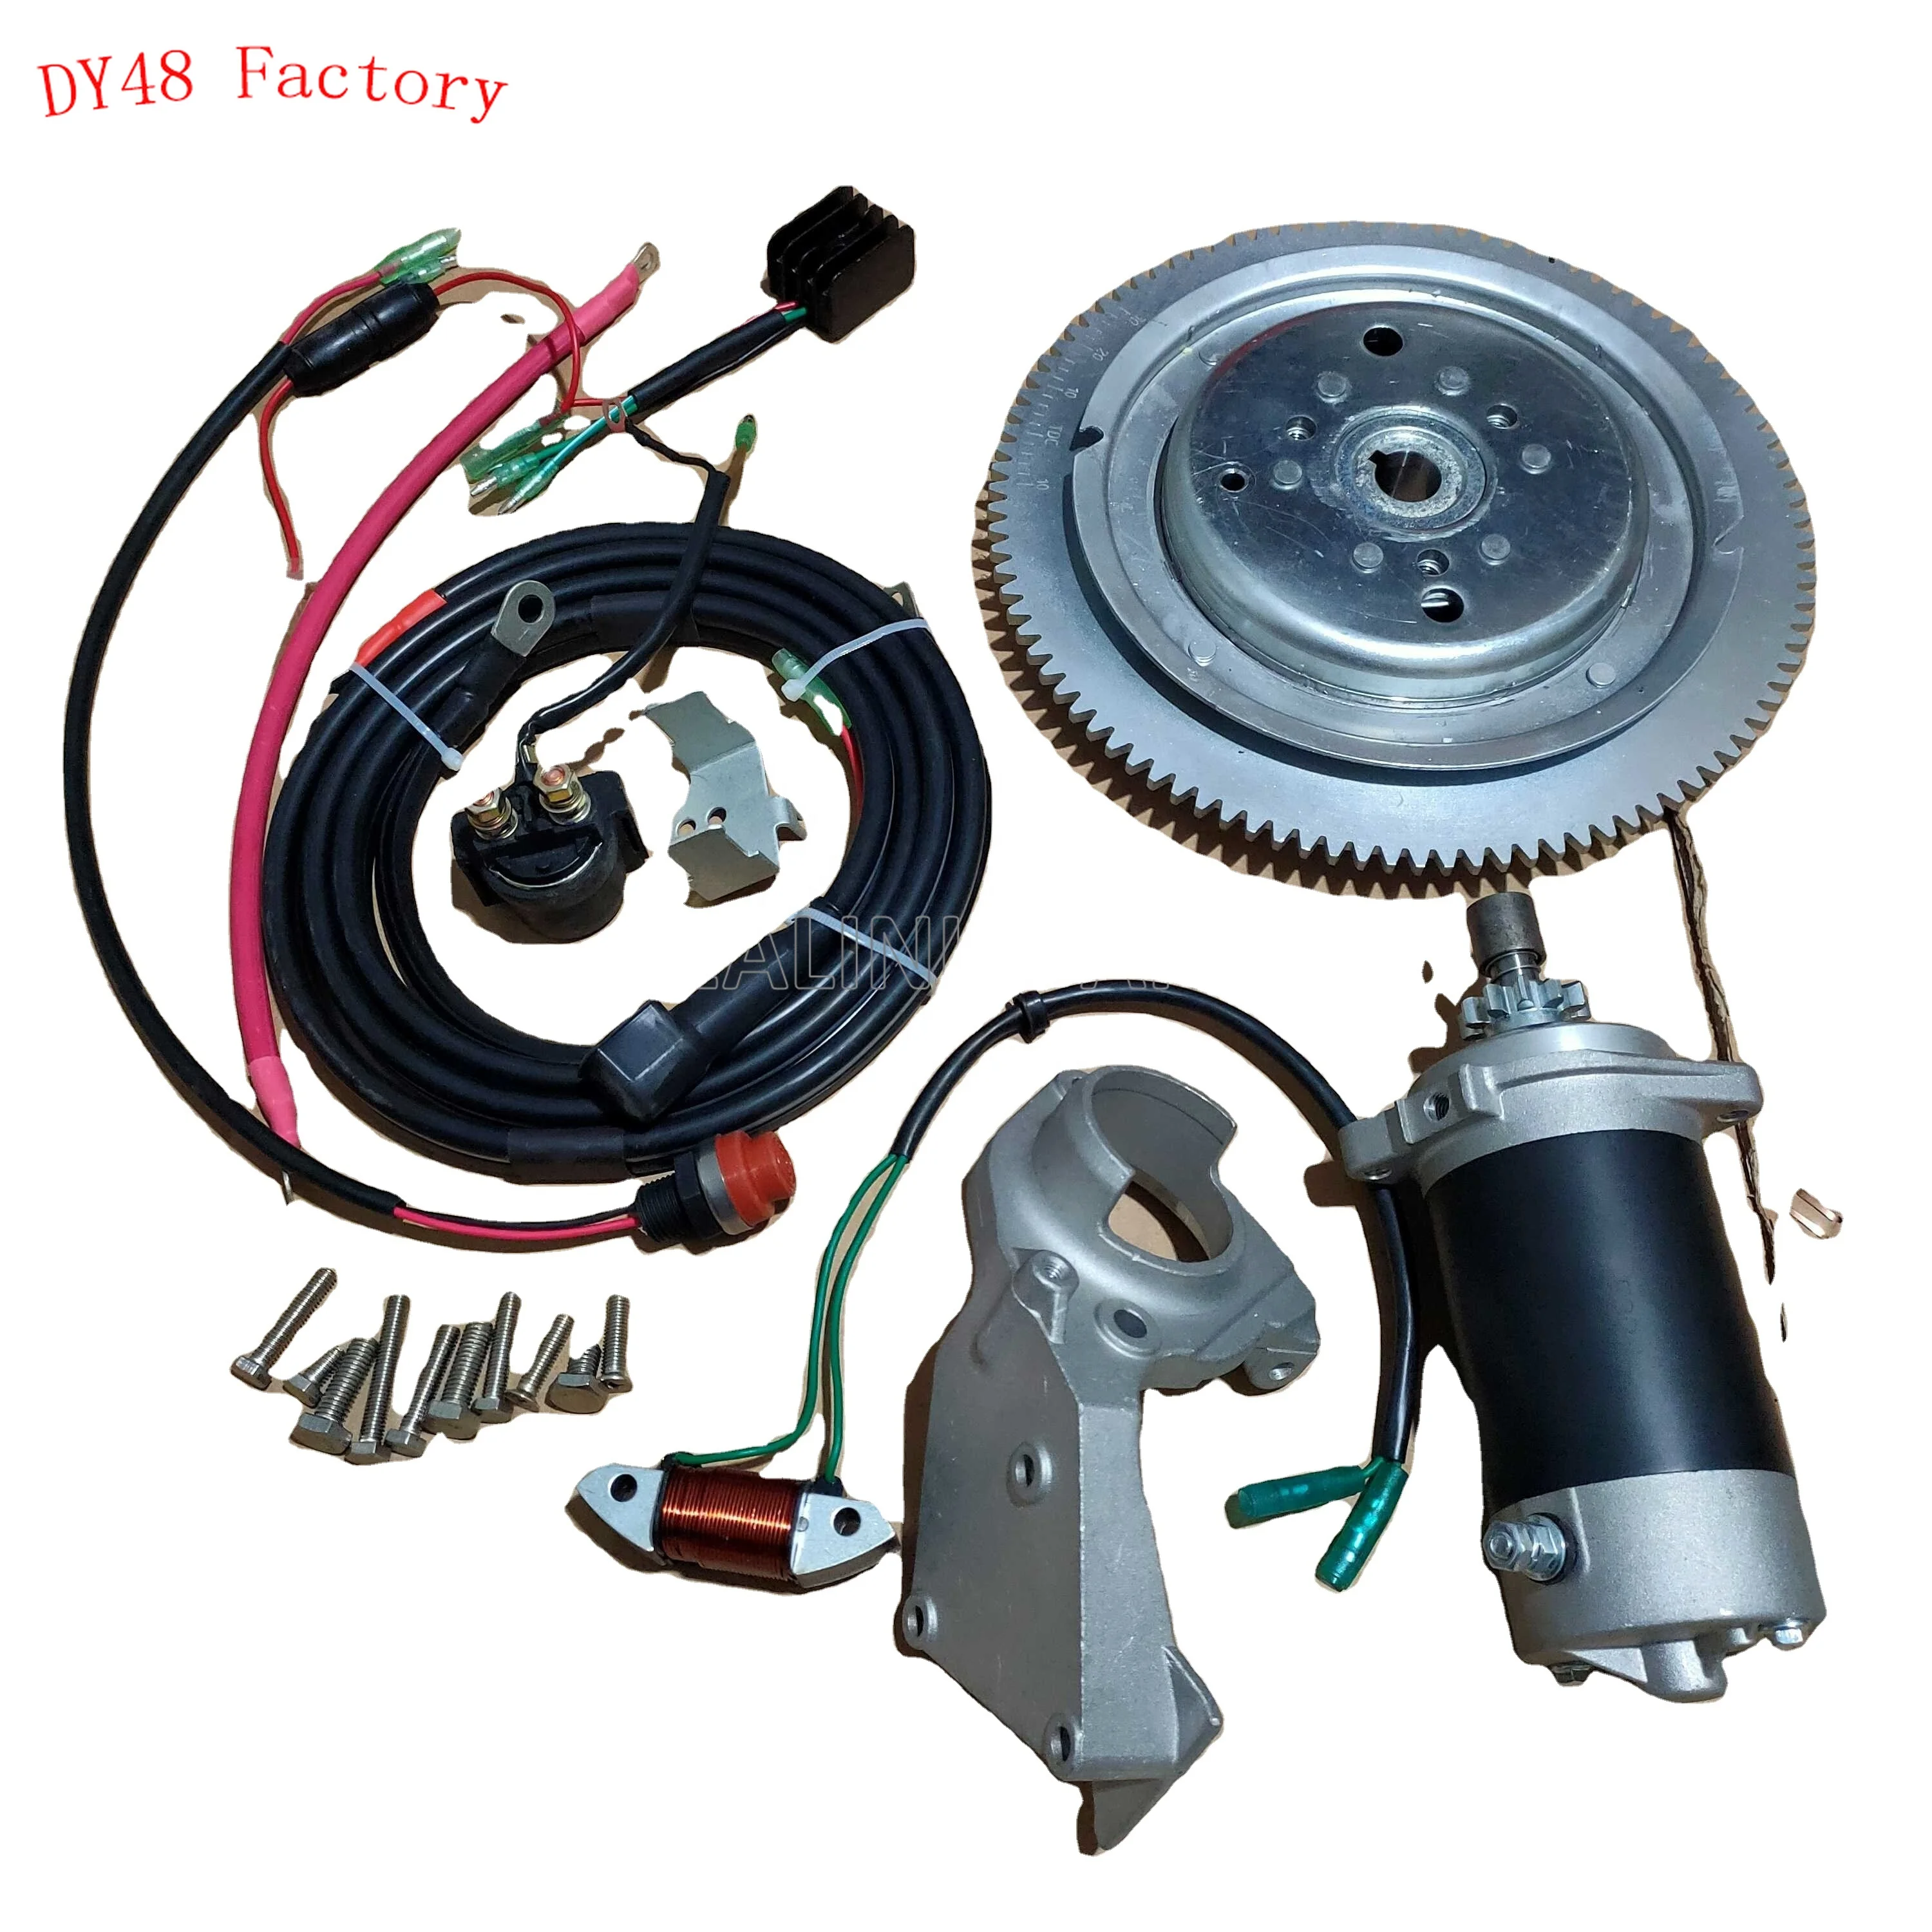 

T30 ELECTRIC START KIT FOR YAMAHA F30HMHS/L HWL MHL 2T 496CC T25 E30 25 30HP OUTBOARD STARTER MOTOR FLYWHEEL CHARGE COIL SWITCH